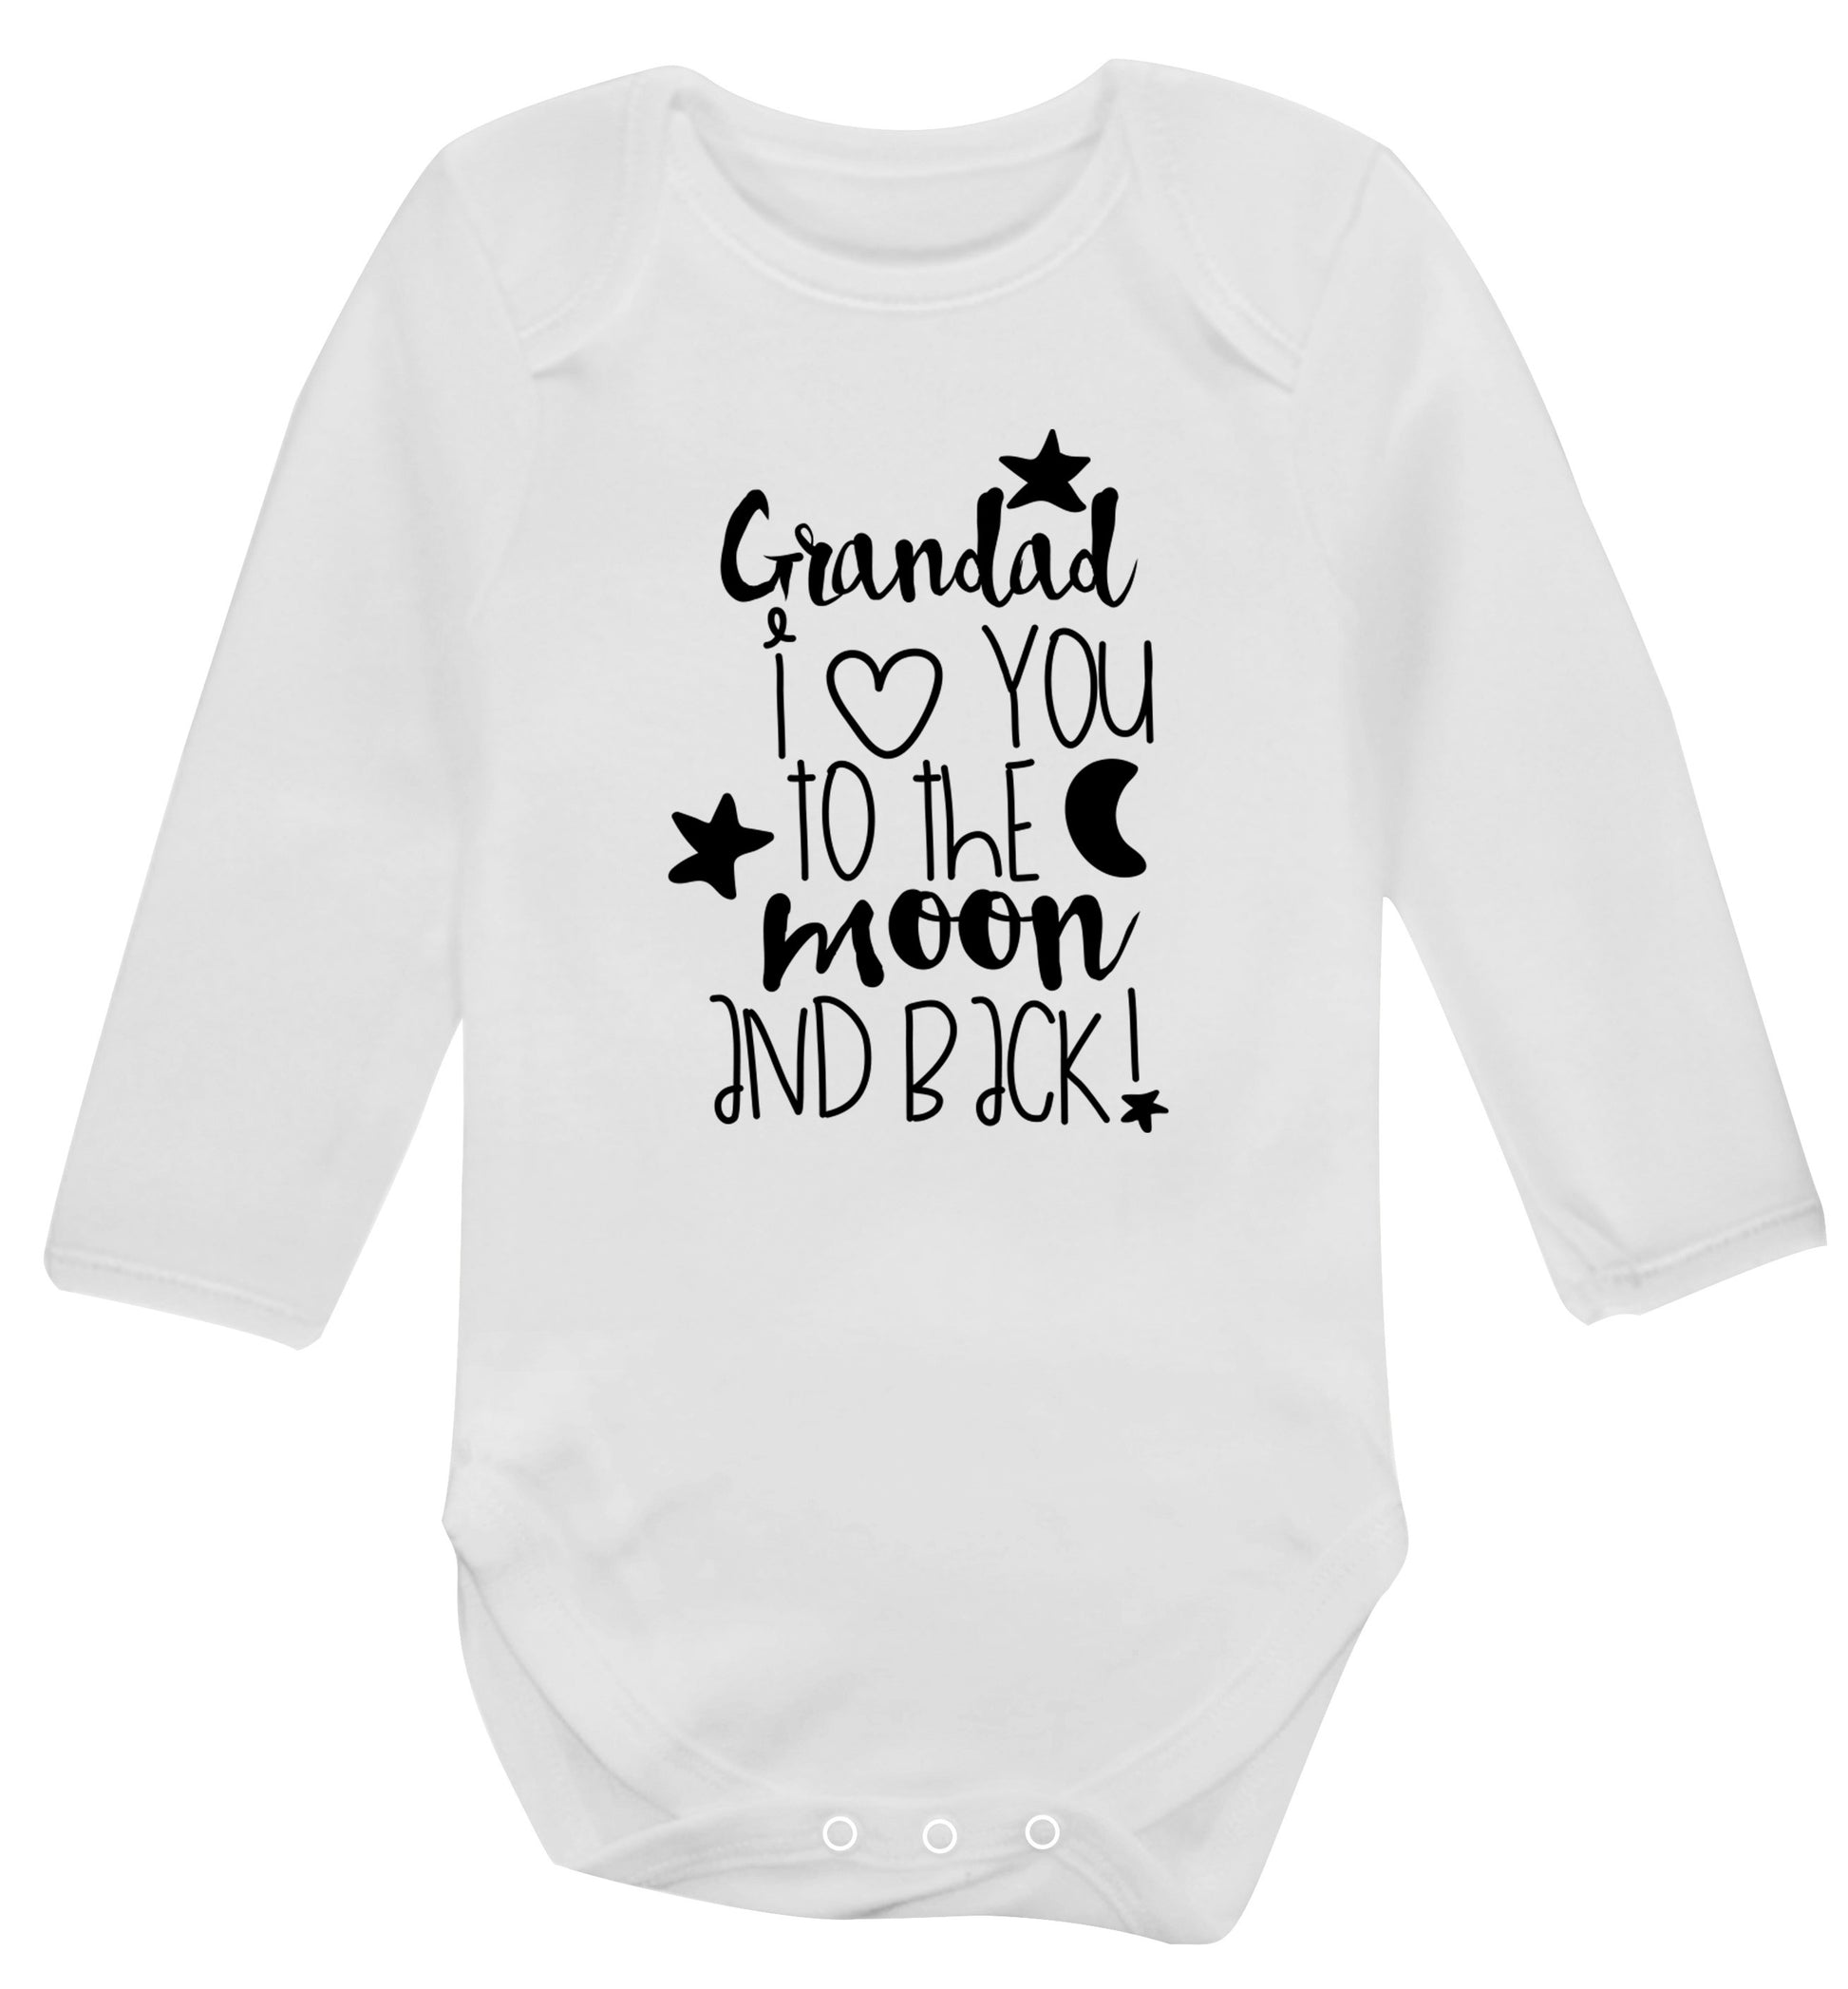 Grandad's I love you to the moon and back Baby Vest long sleeved white 6-12 months